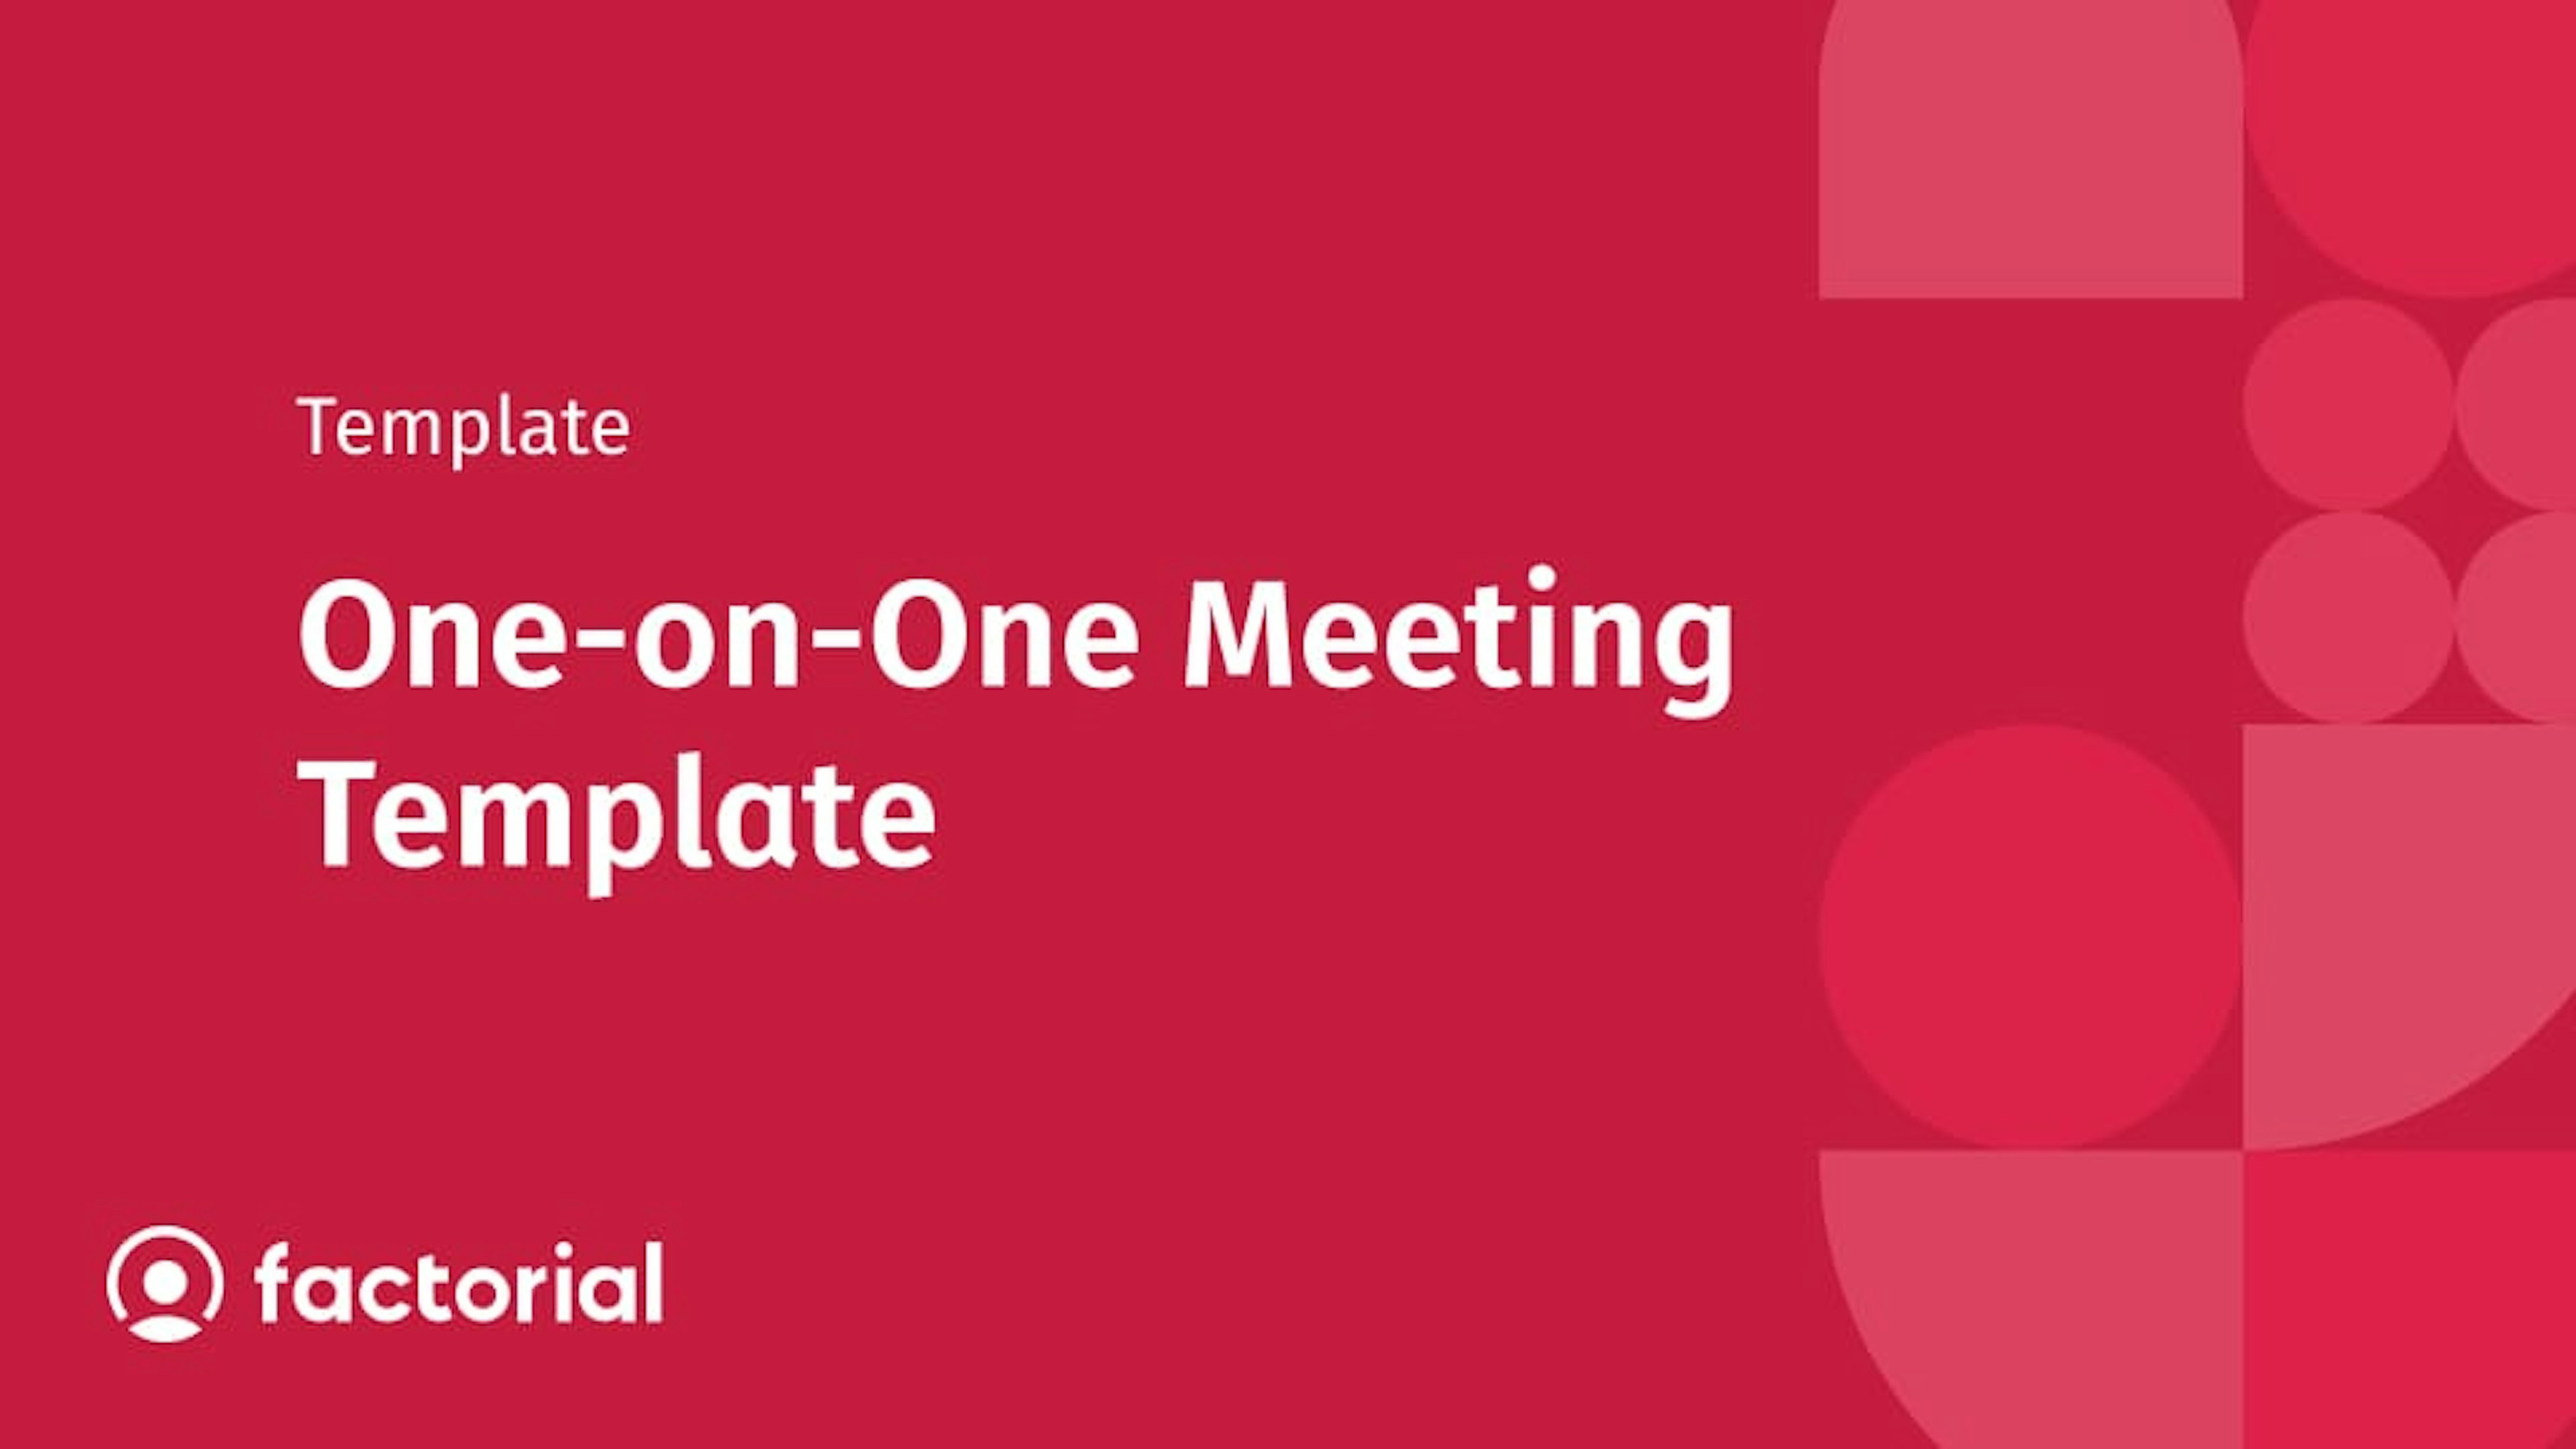 One-on-One Meeting Template